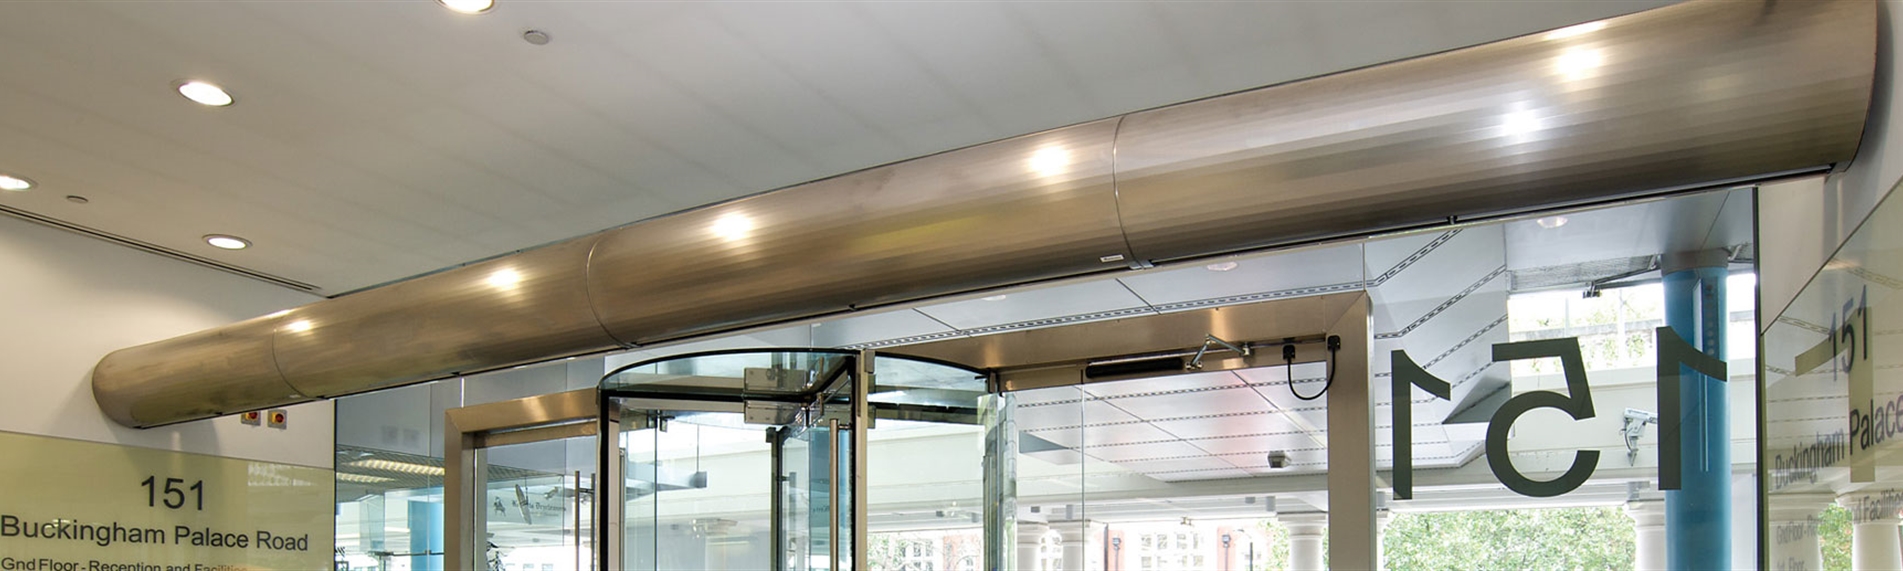 JS Air Curtains goes to great lengths at 151 Buckingham Palace Road